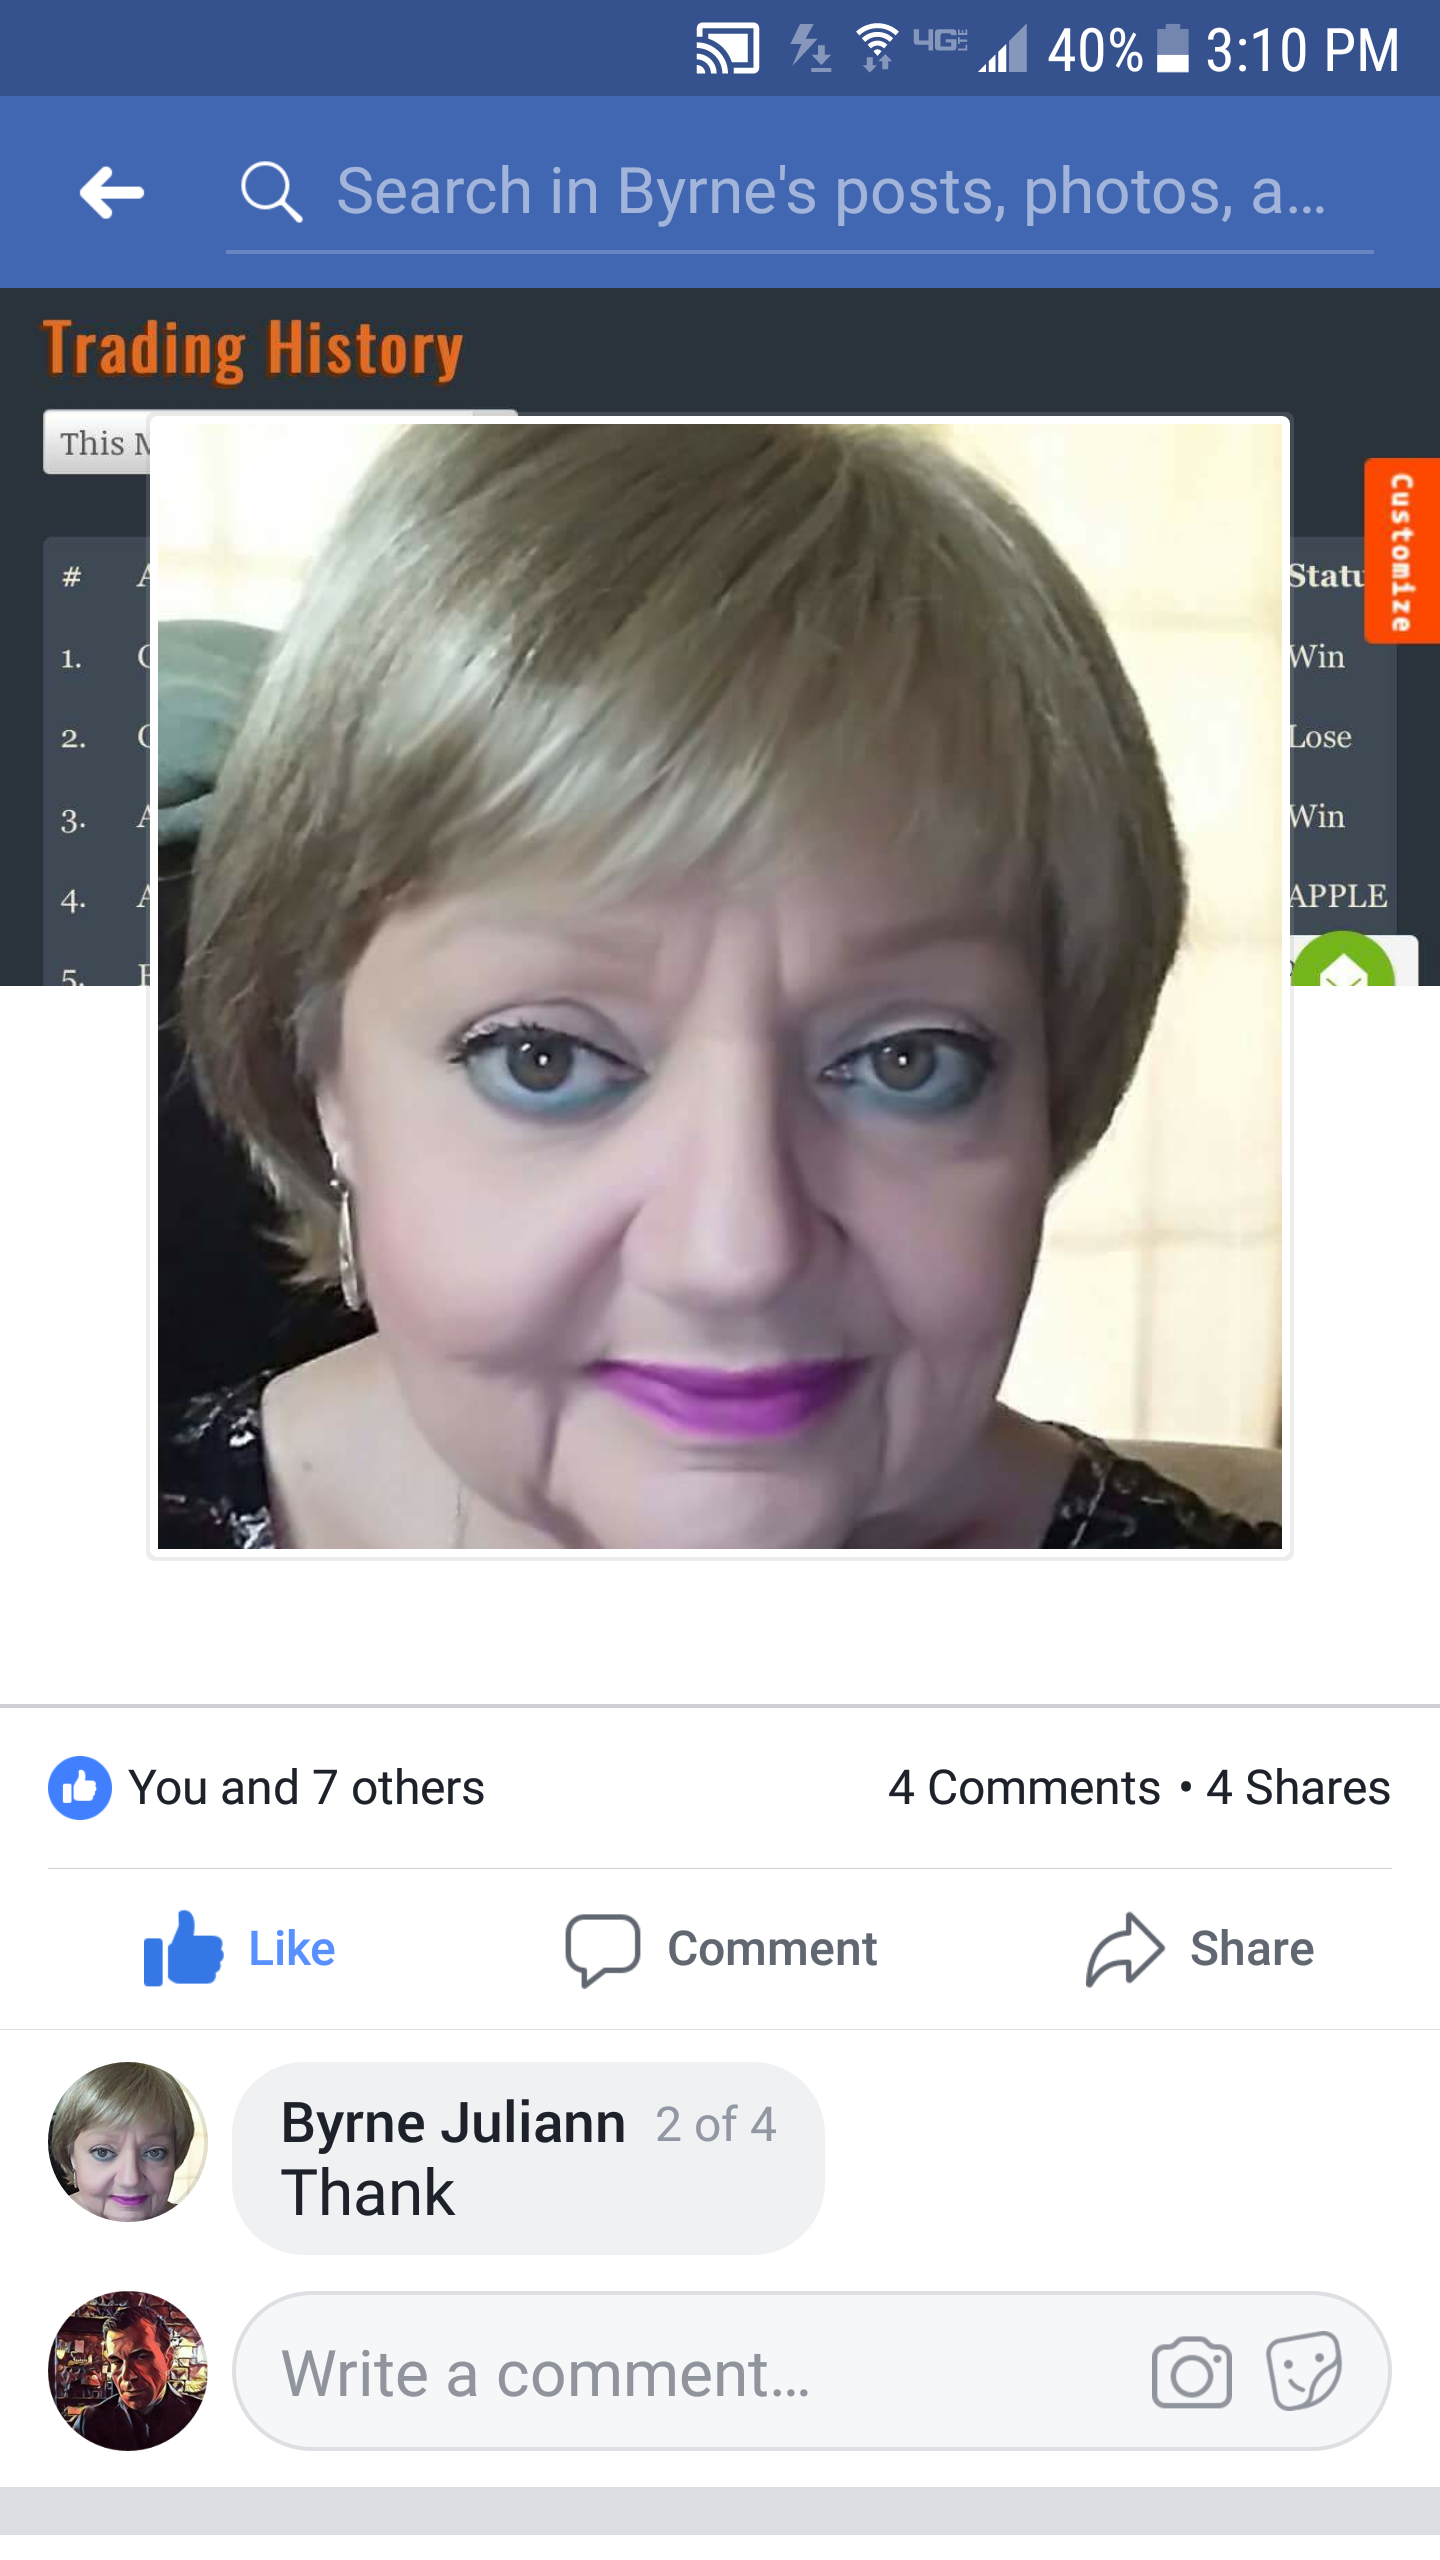 Her Facebook page